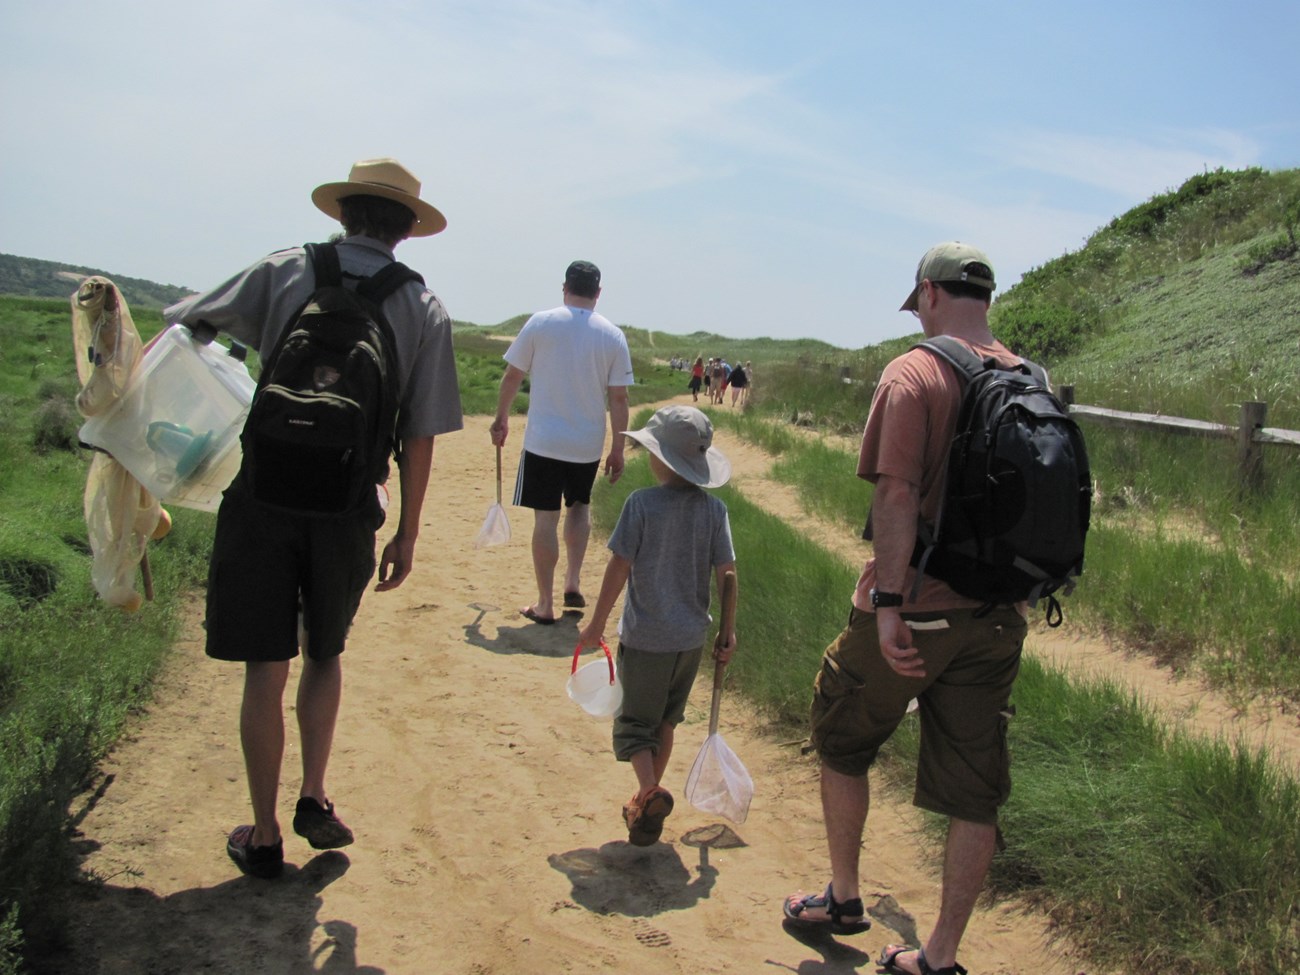 A ranger walks with a group of people along a sandy path